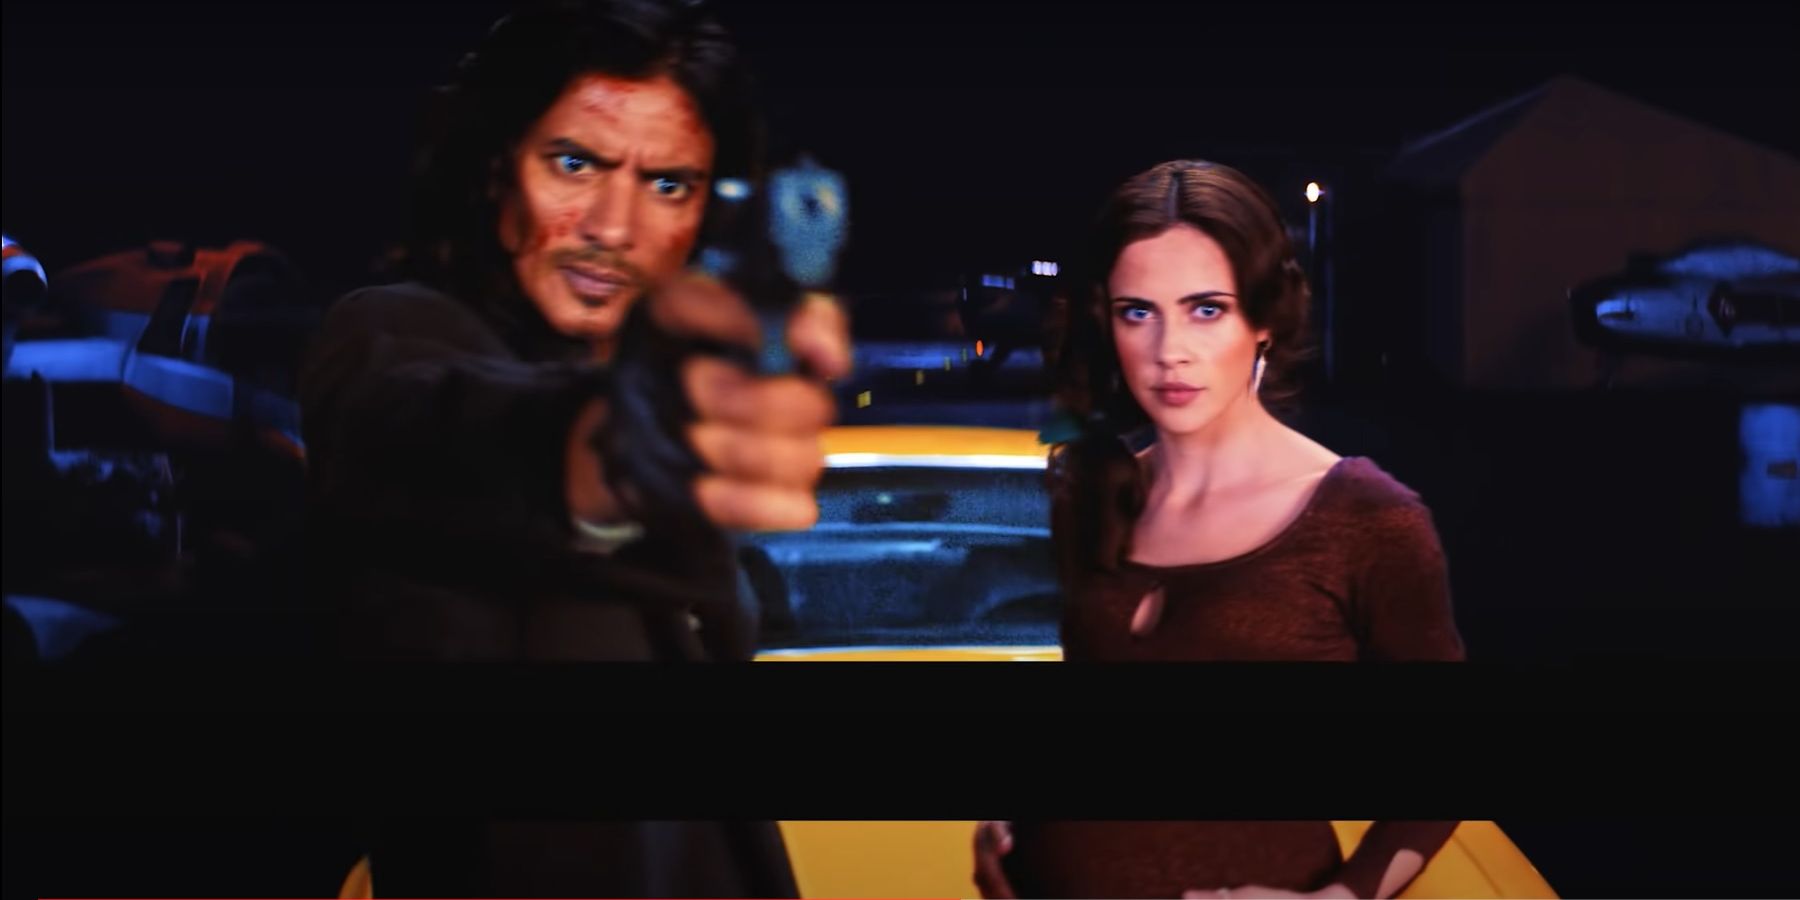 Jan Uddin and Lydia Peckham as Asimov and Katerina in netflix's live action cowboy bebop